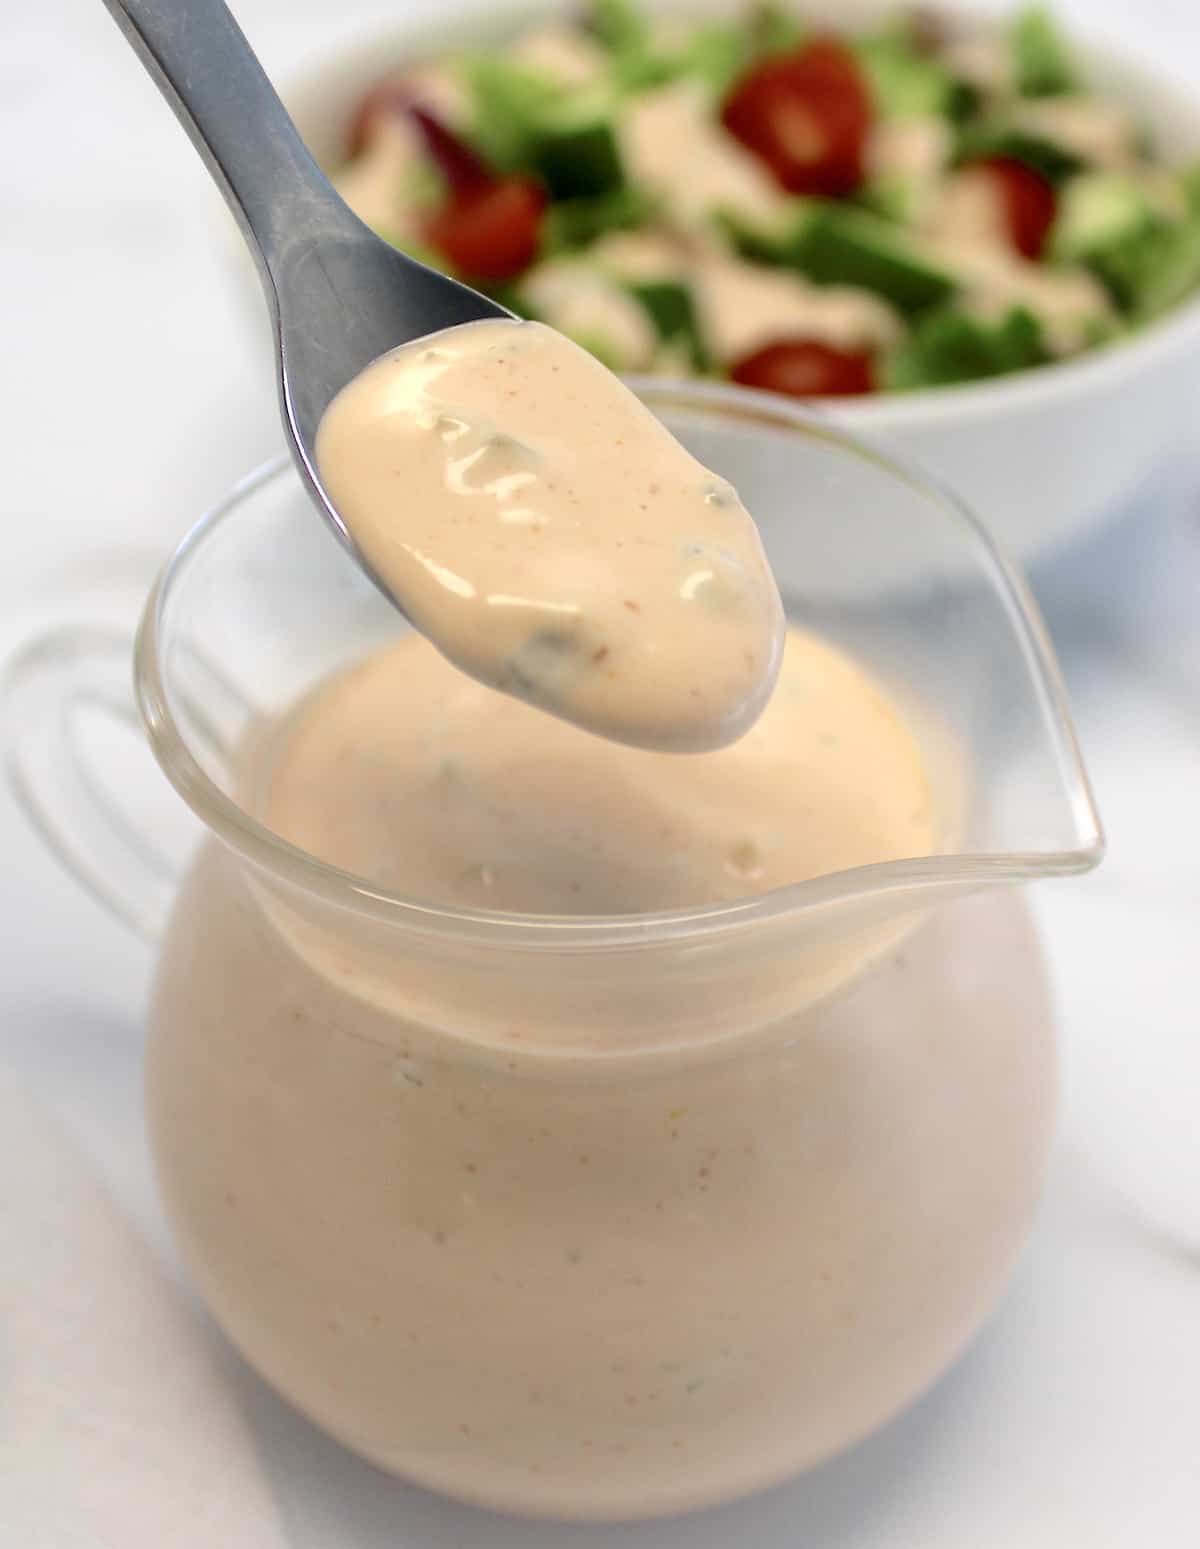 Thousand Island Dressing being spooned out of glass pitcher with salad in background